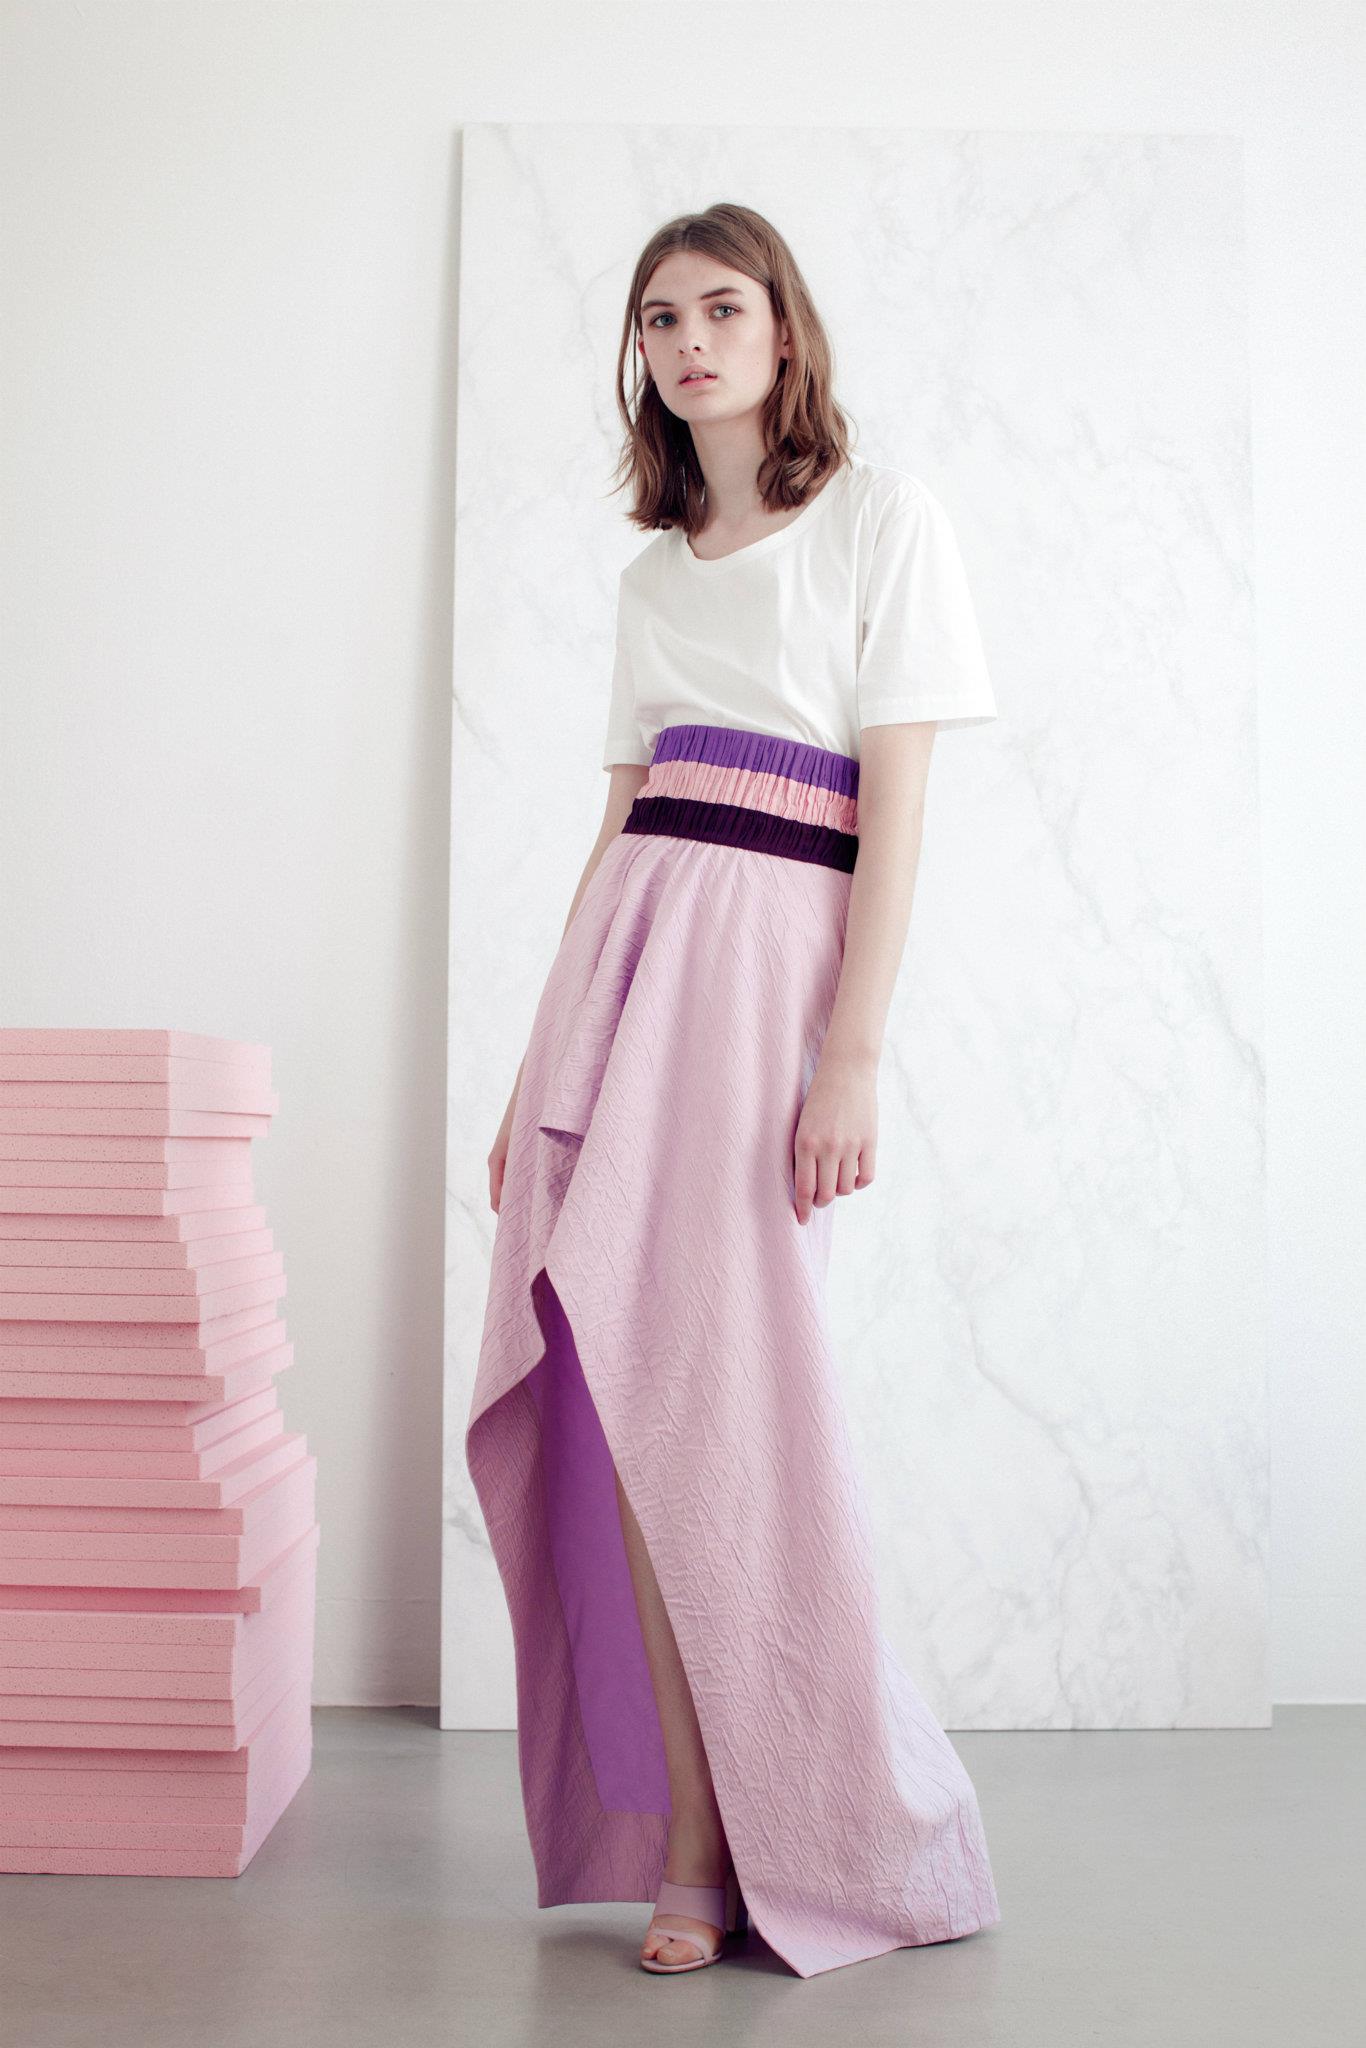 Vionnet Spring 2013 Collection 19